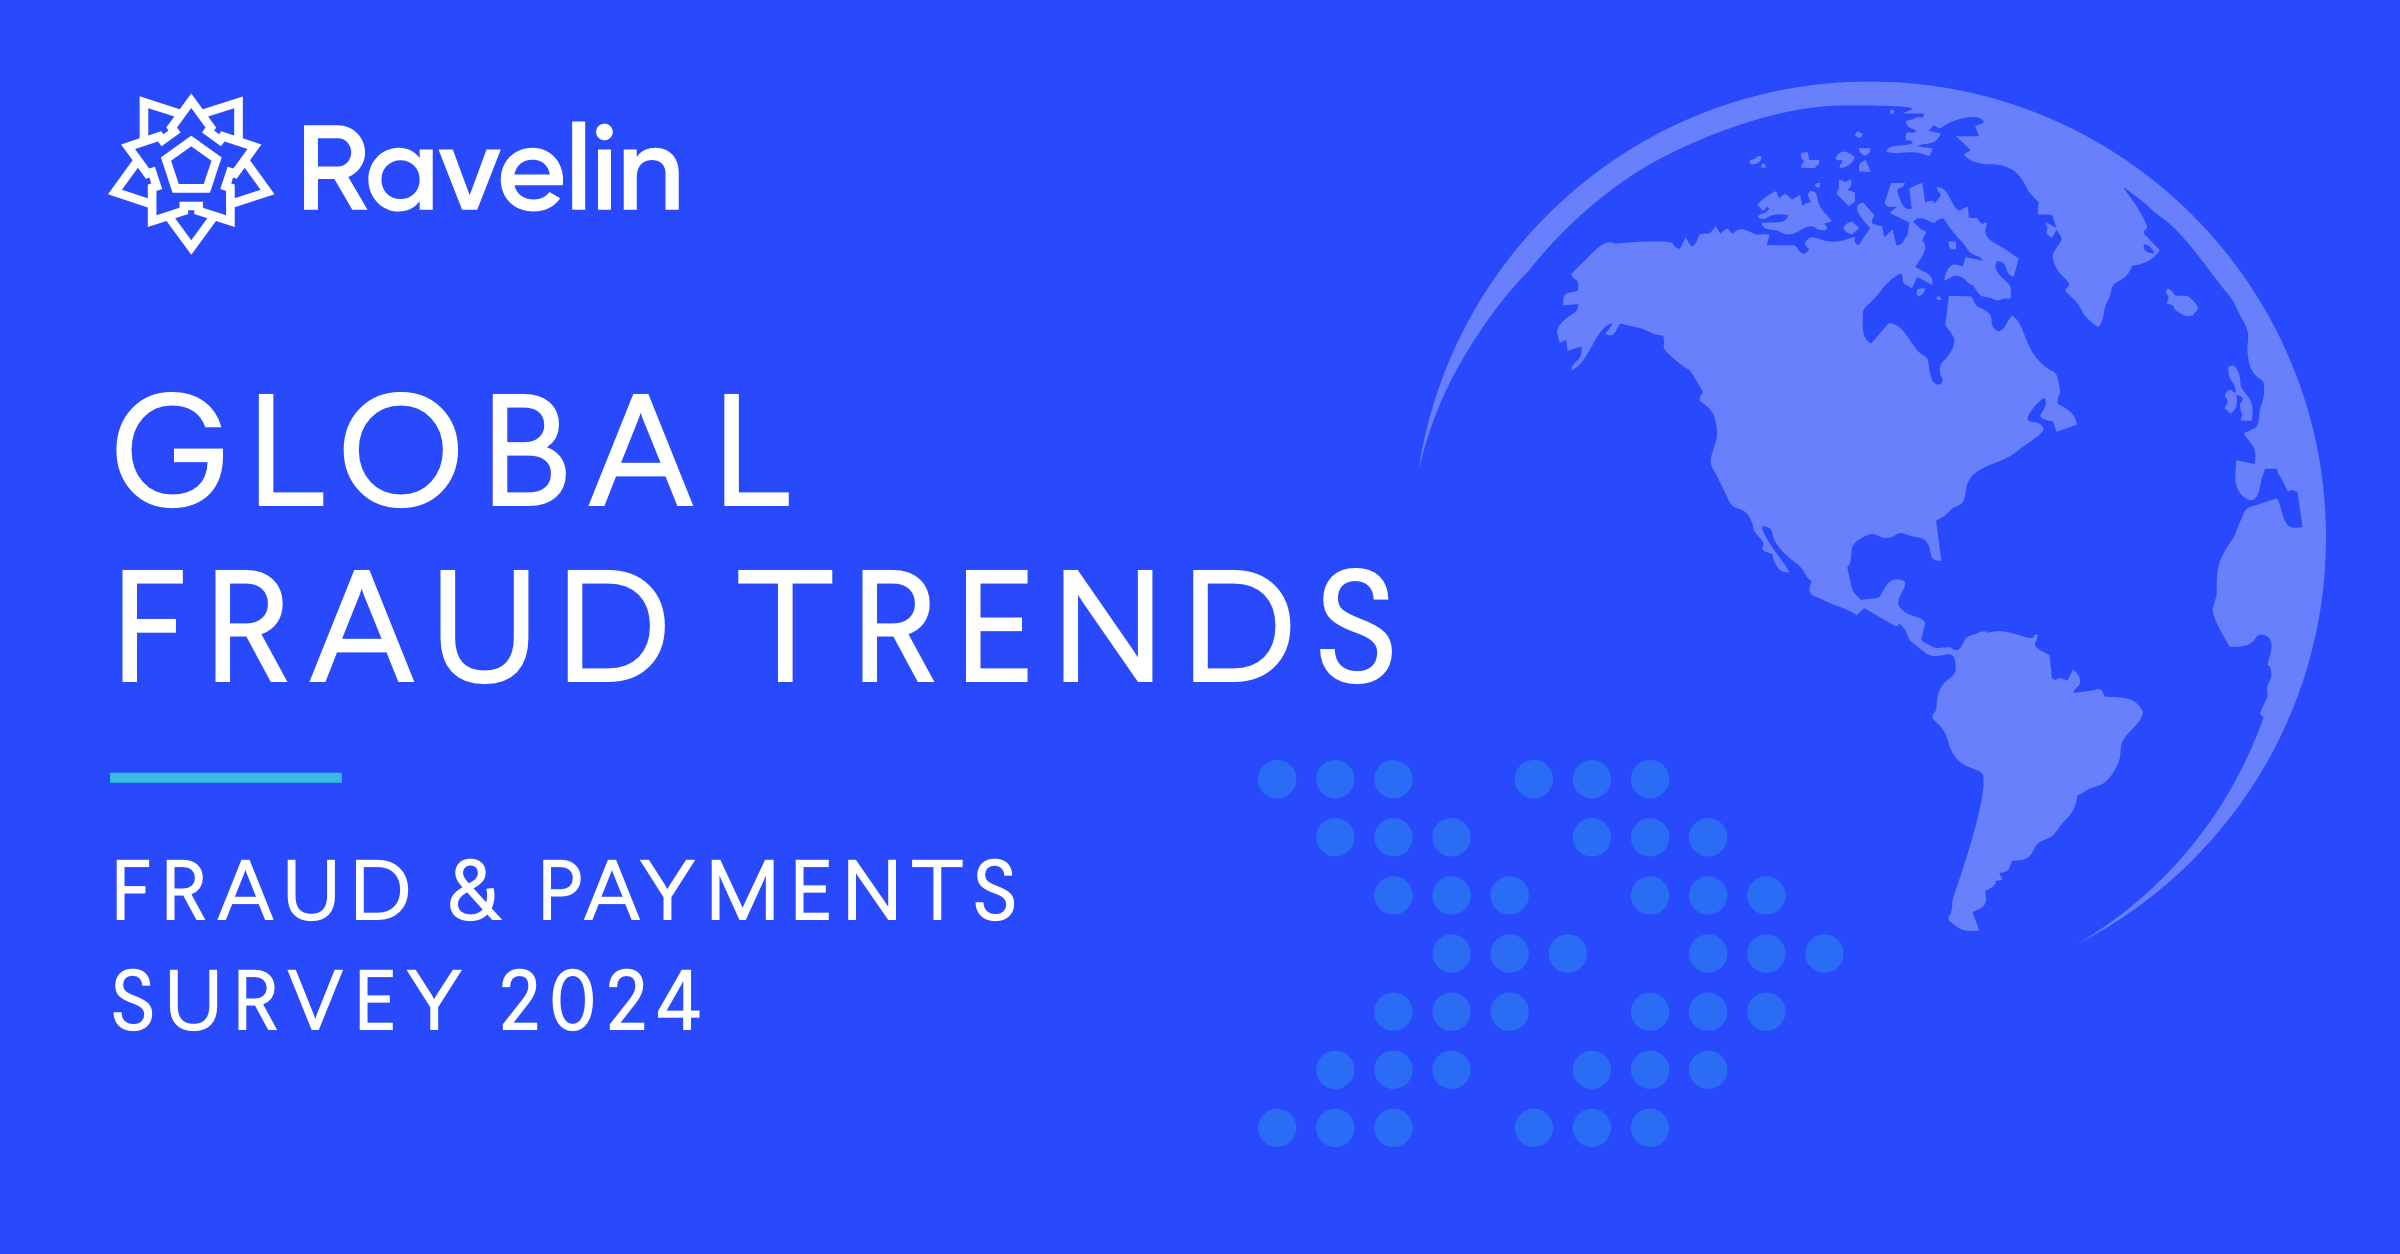 296 Global Fraud Trends Survey Landing Page 1200 x 627 2